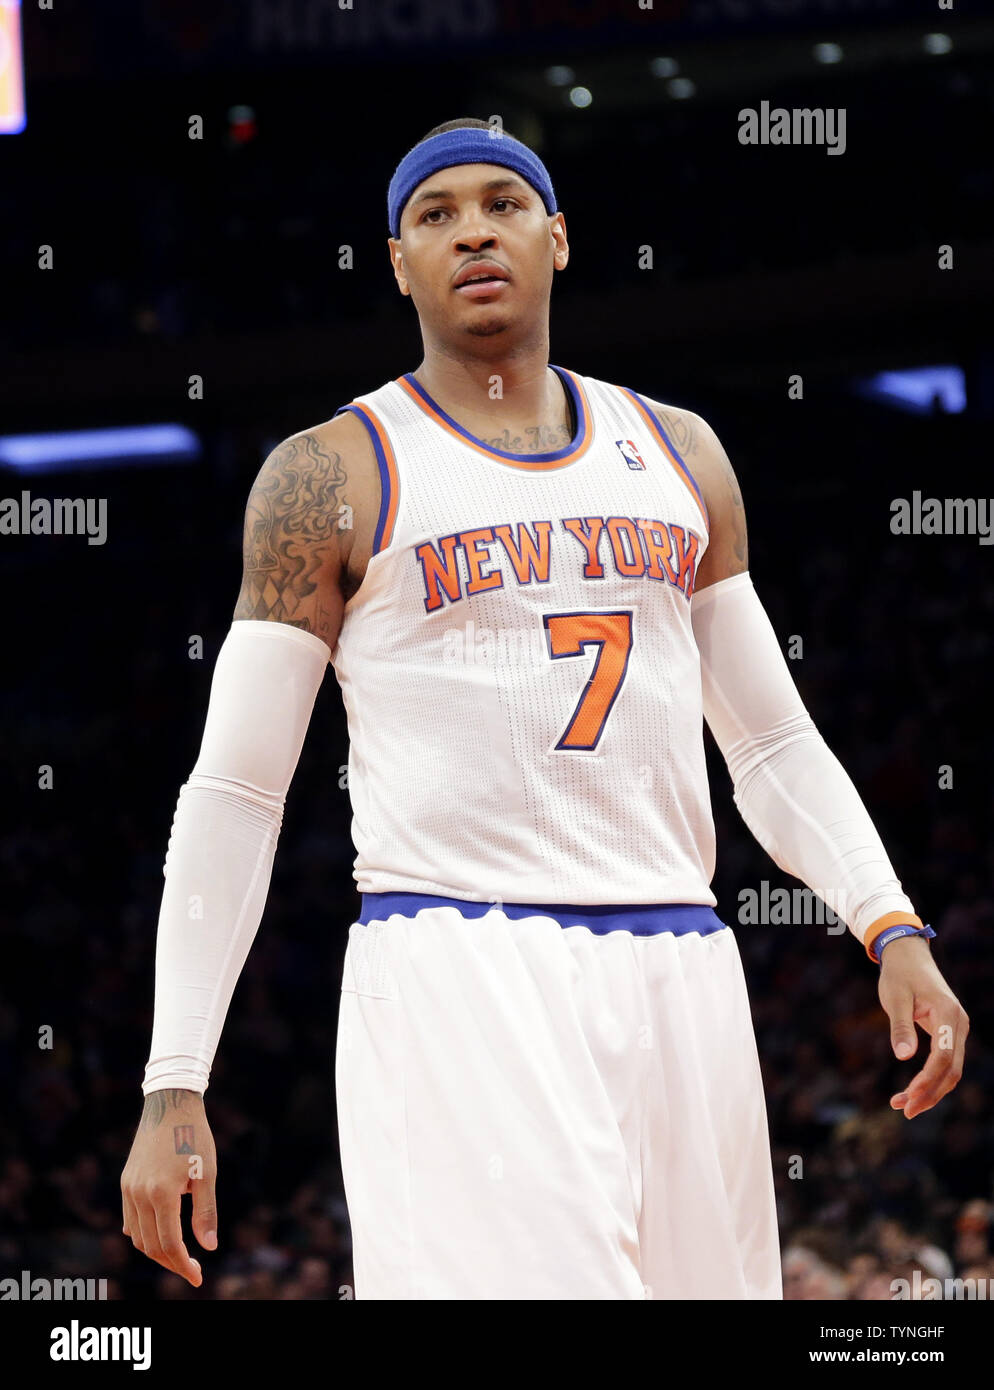 Carmelo Anthony scores 31 points as Knicks down Nets, 100-86 